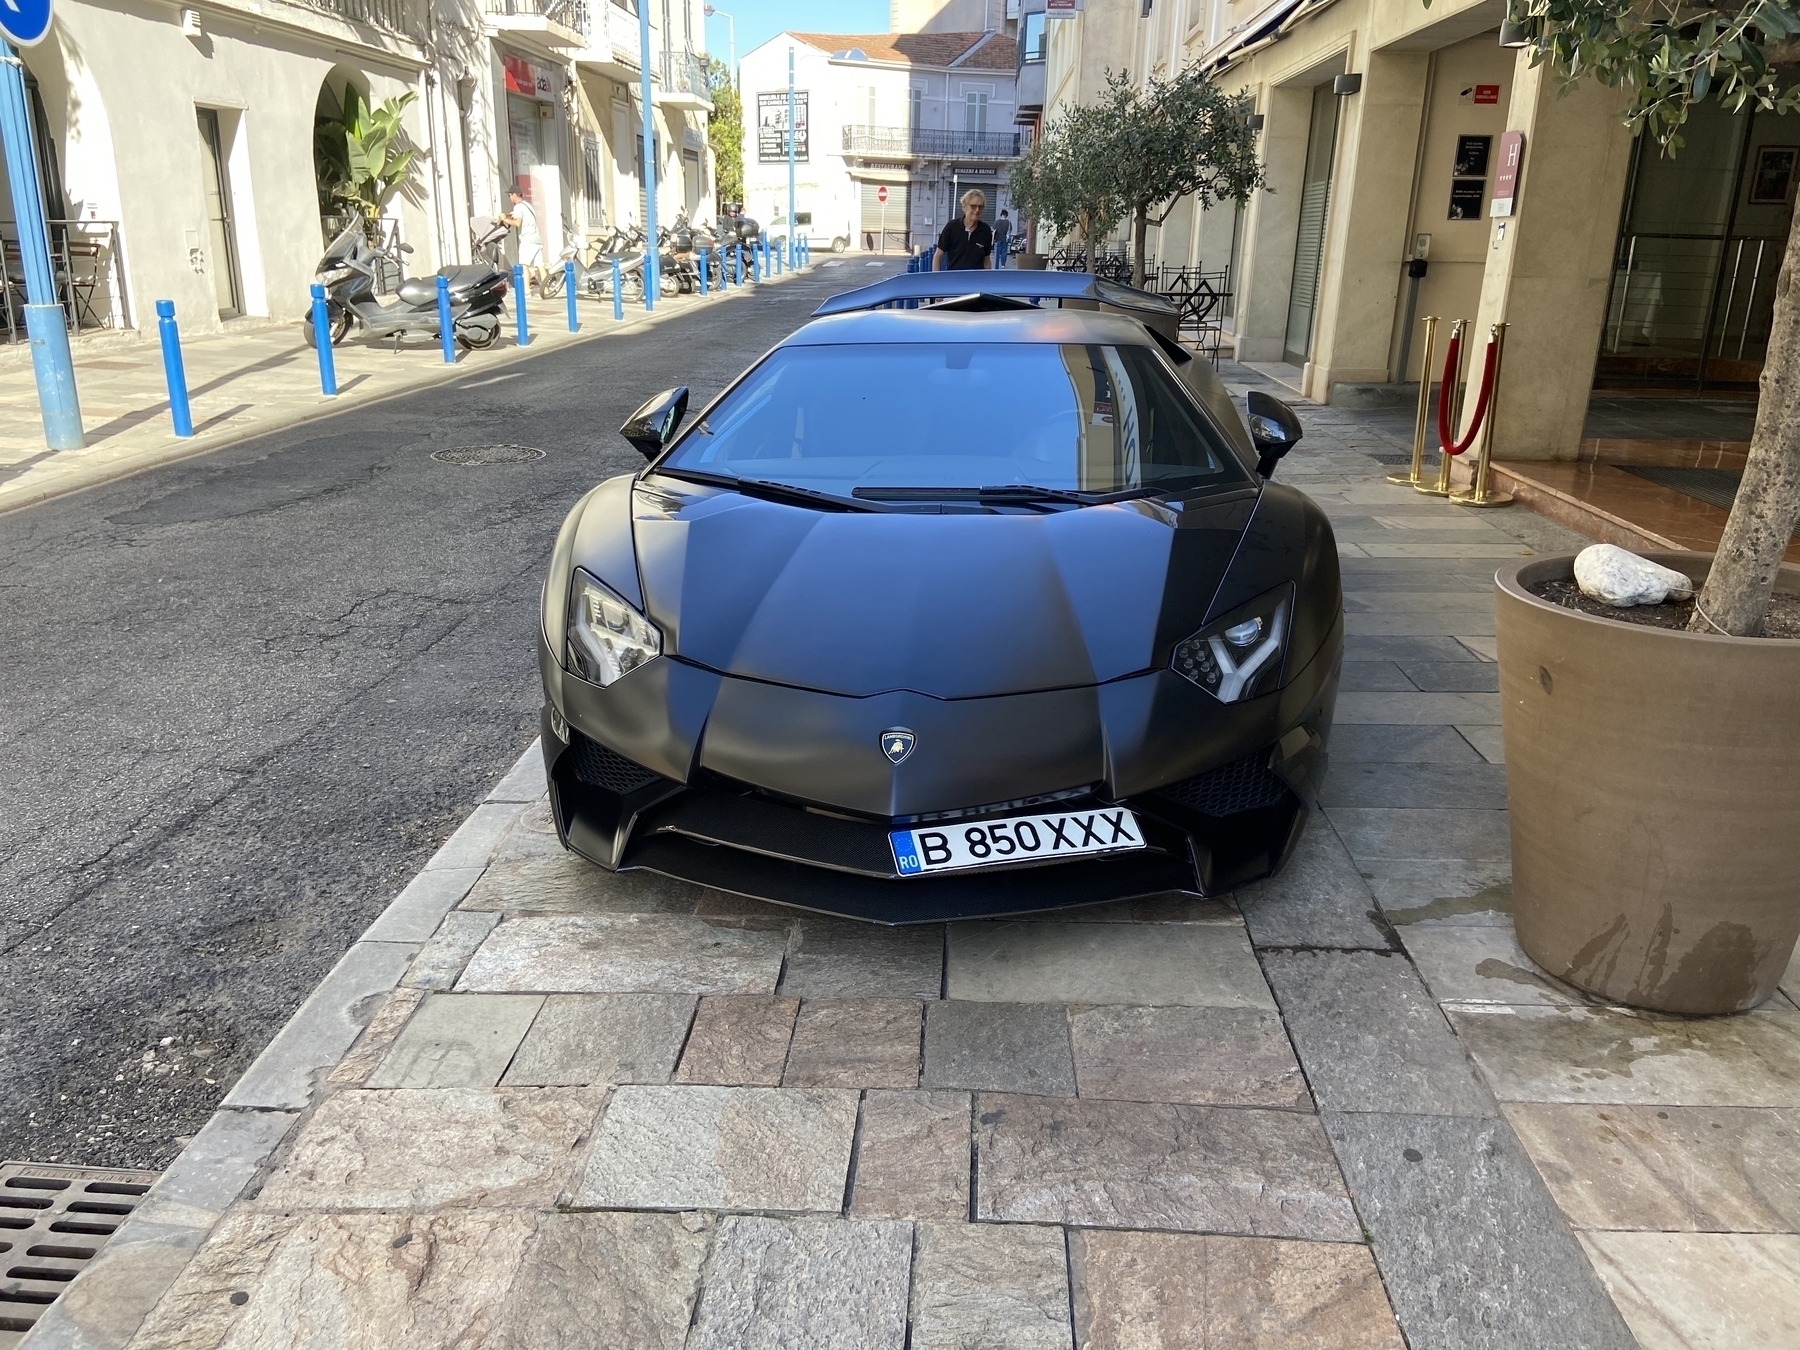 Whoever parked this Lamborghini at my hotel forgot to leave the keys for me.